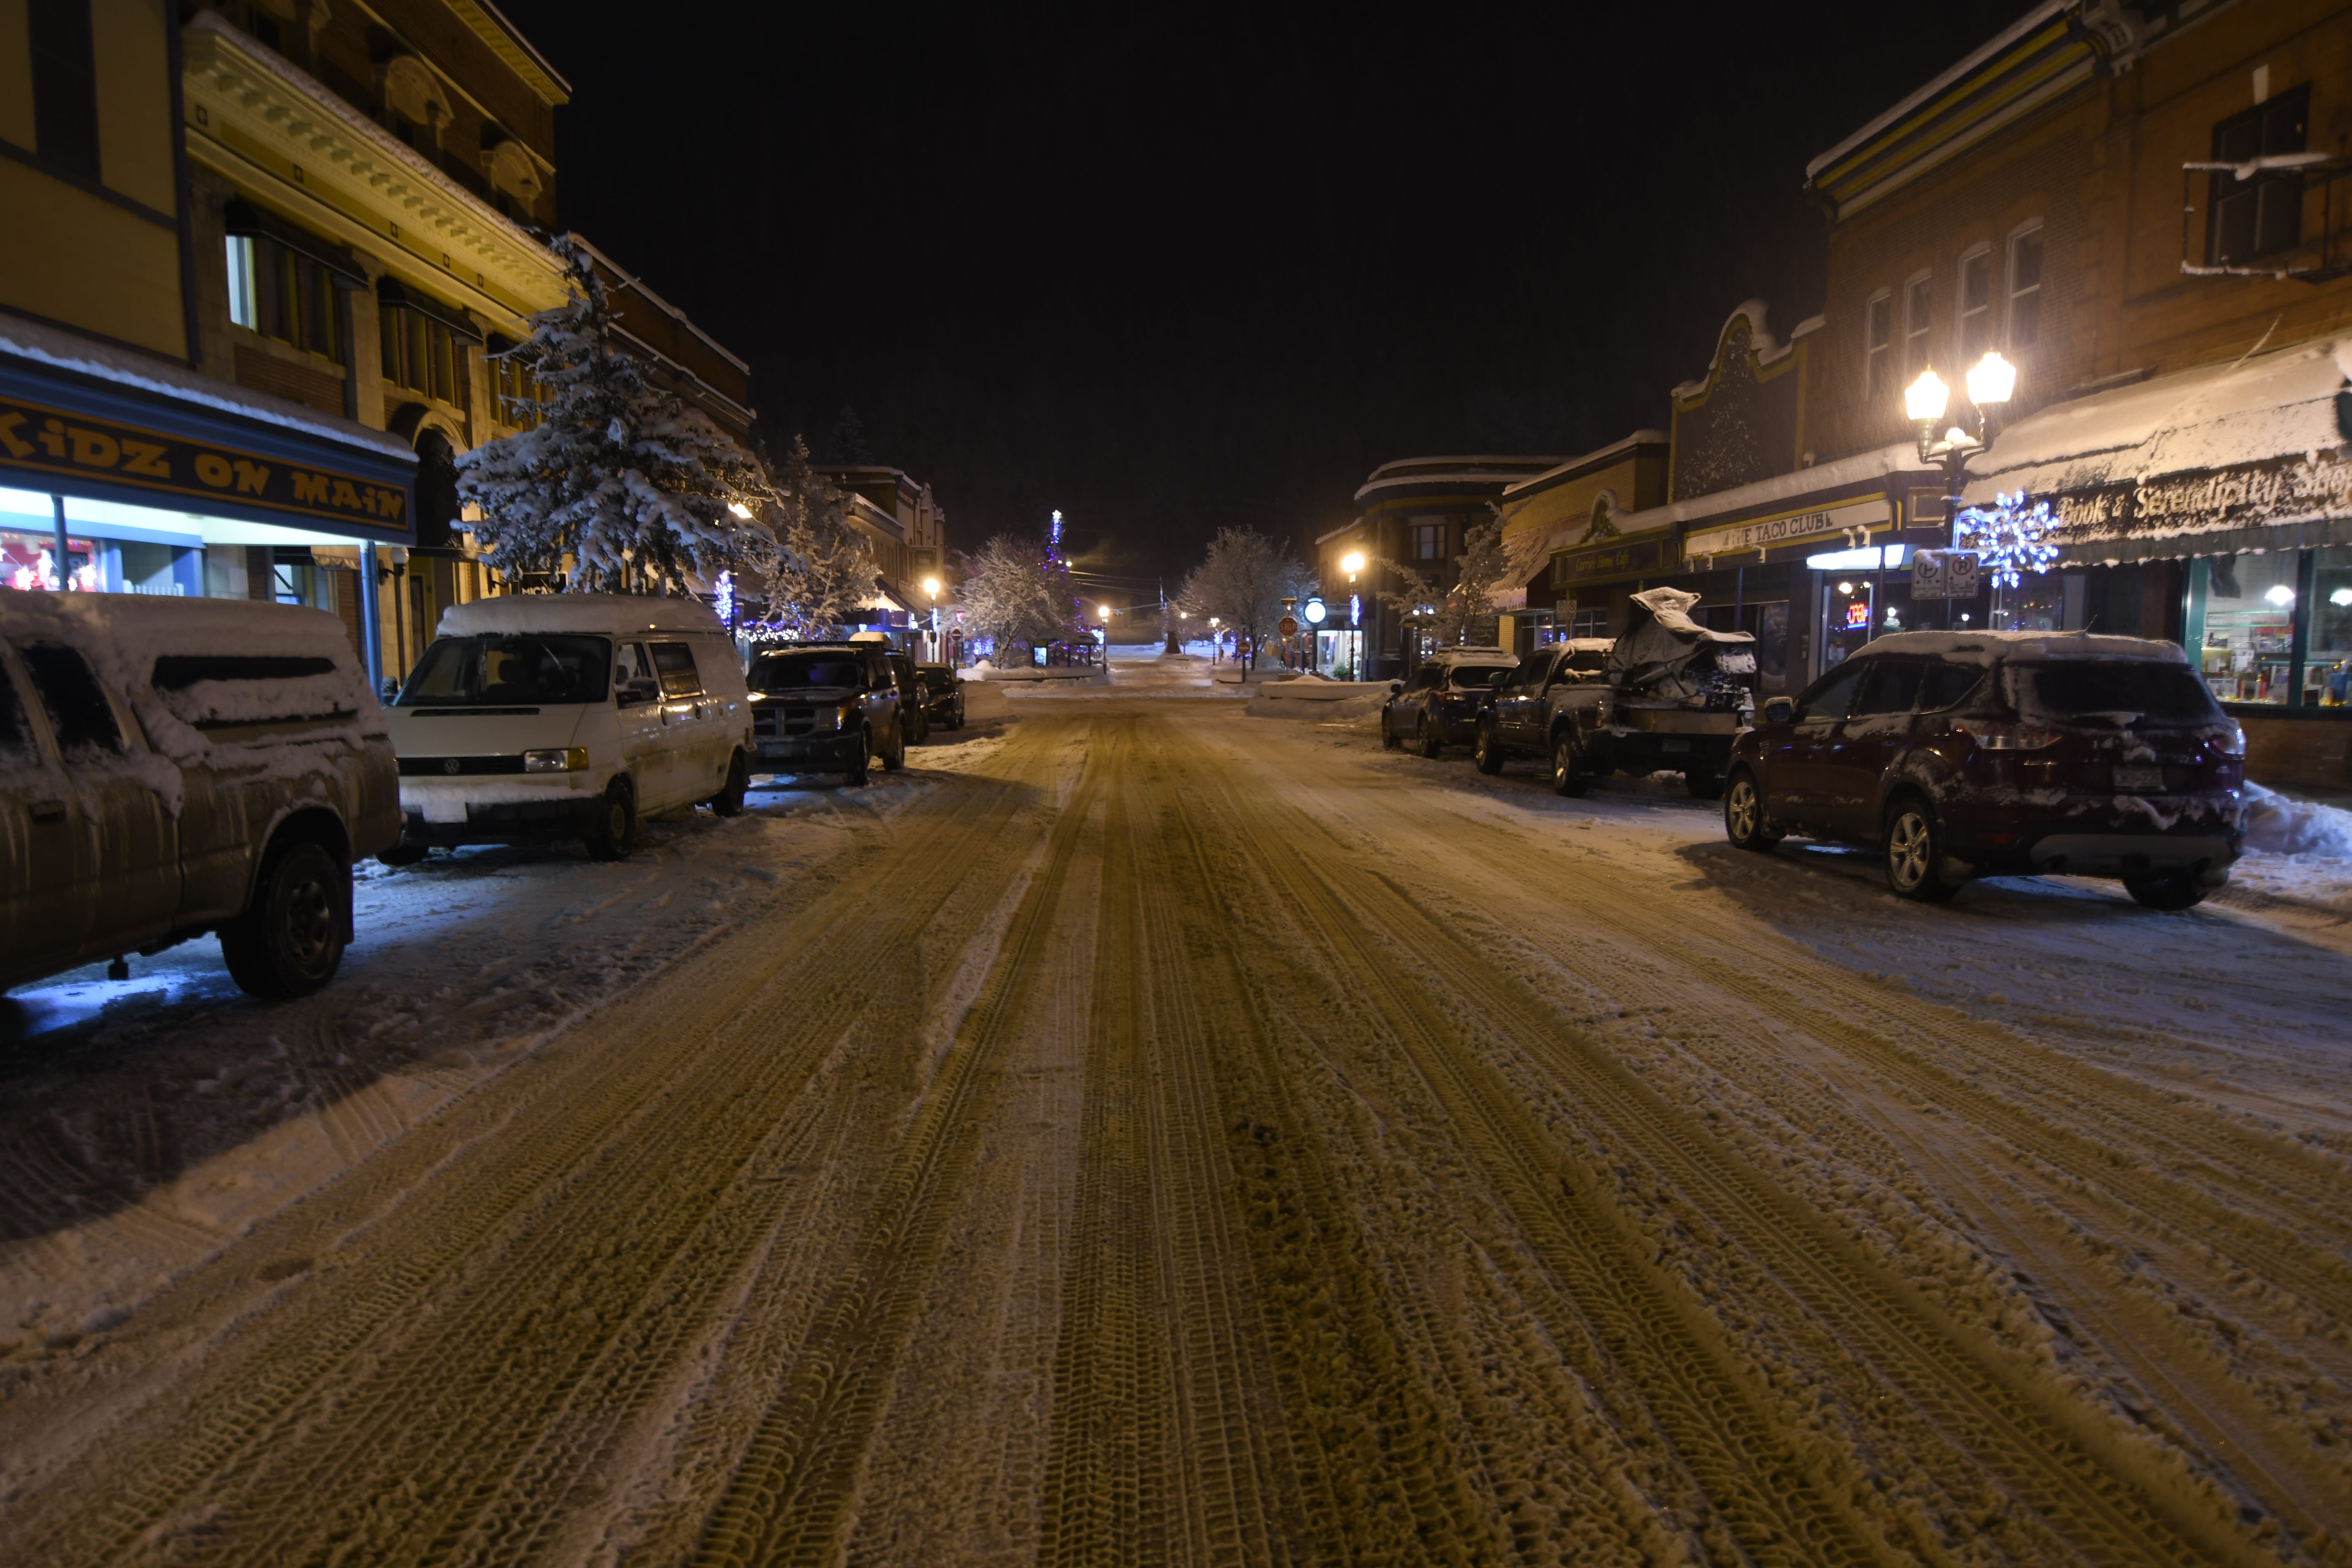 Revelstoke downtown on Christmas Eve. Photo: Andrew Fish